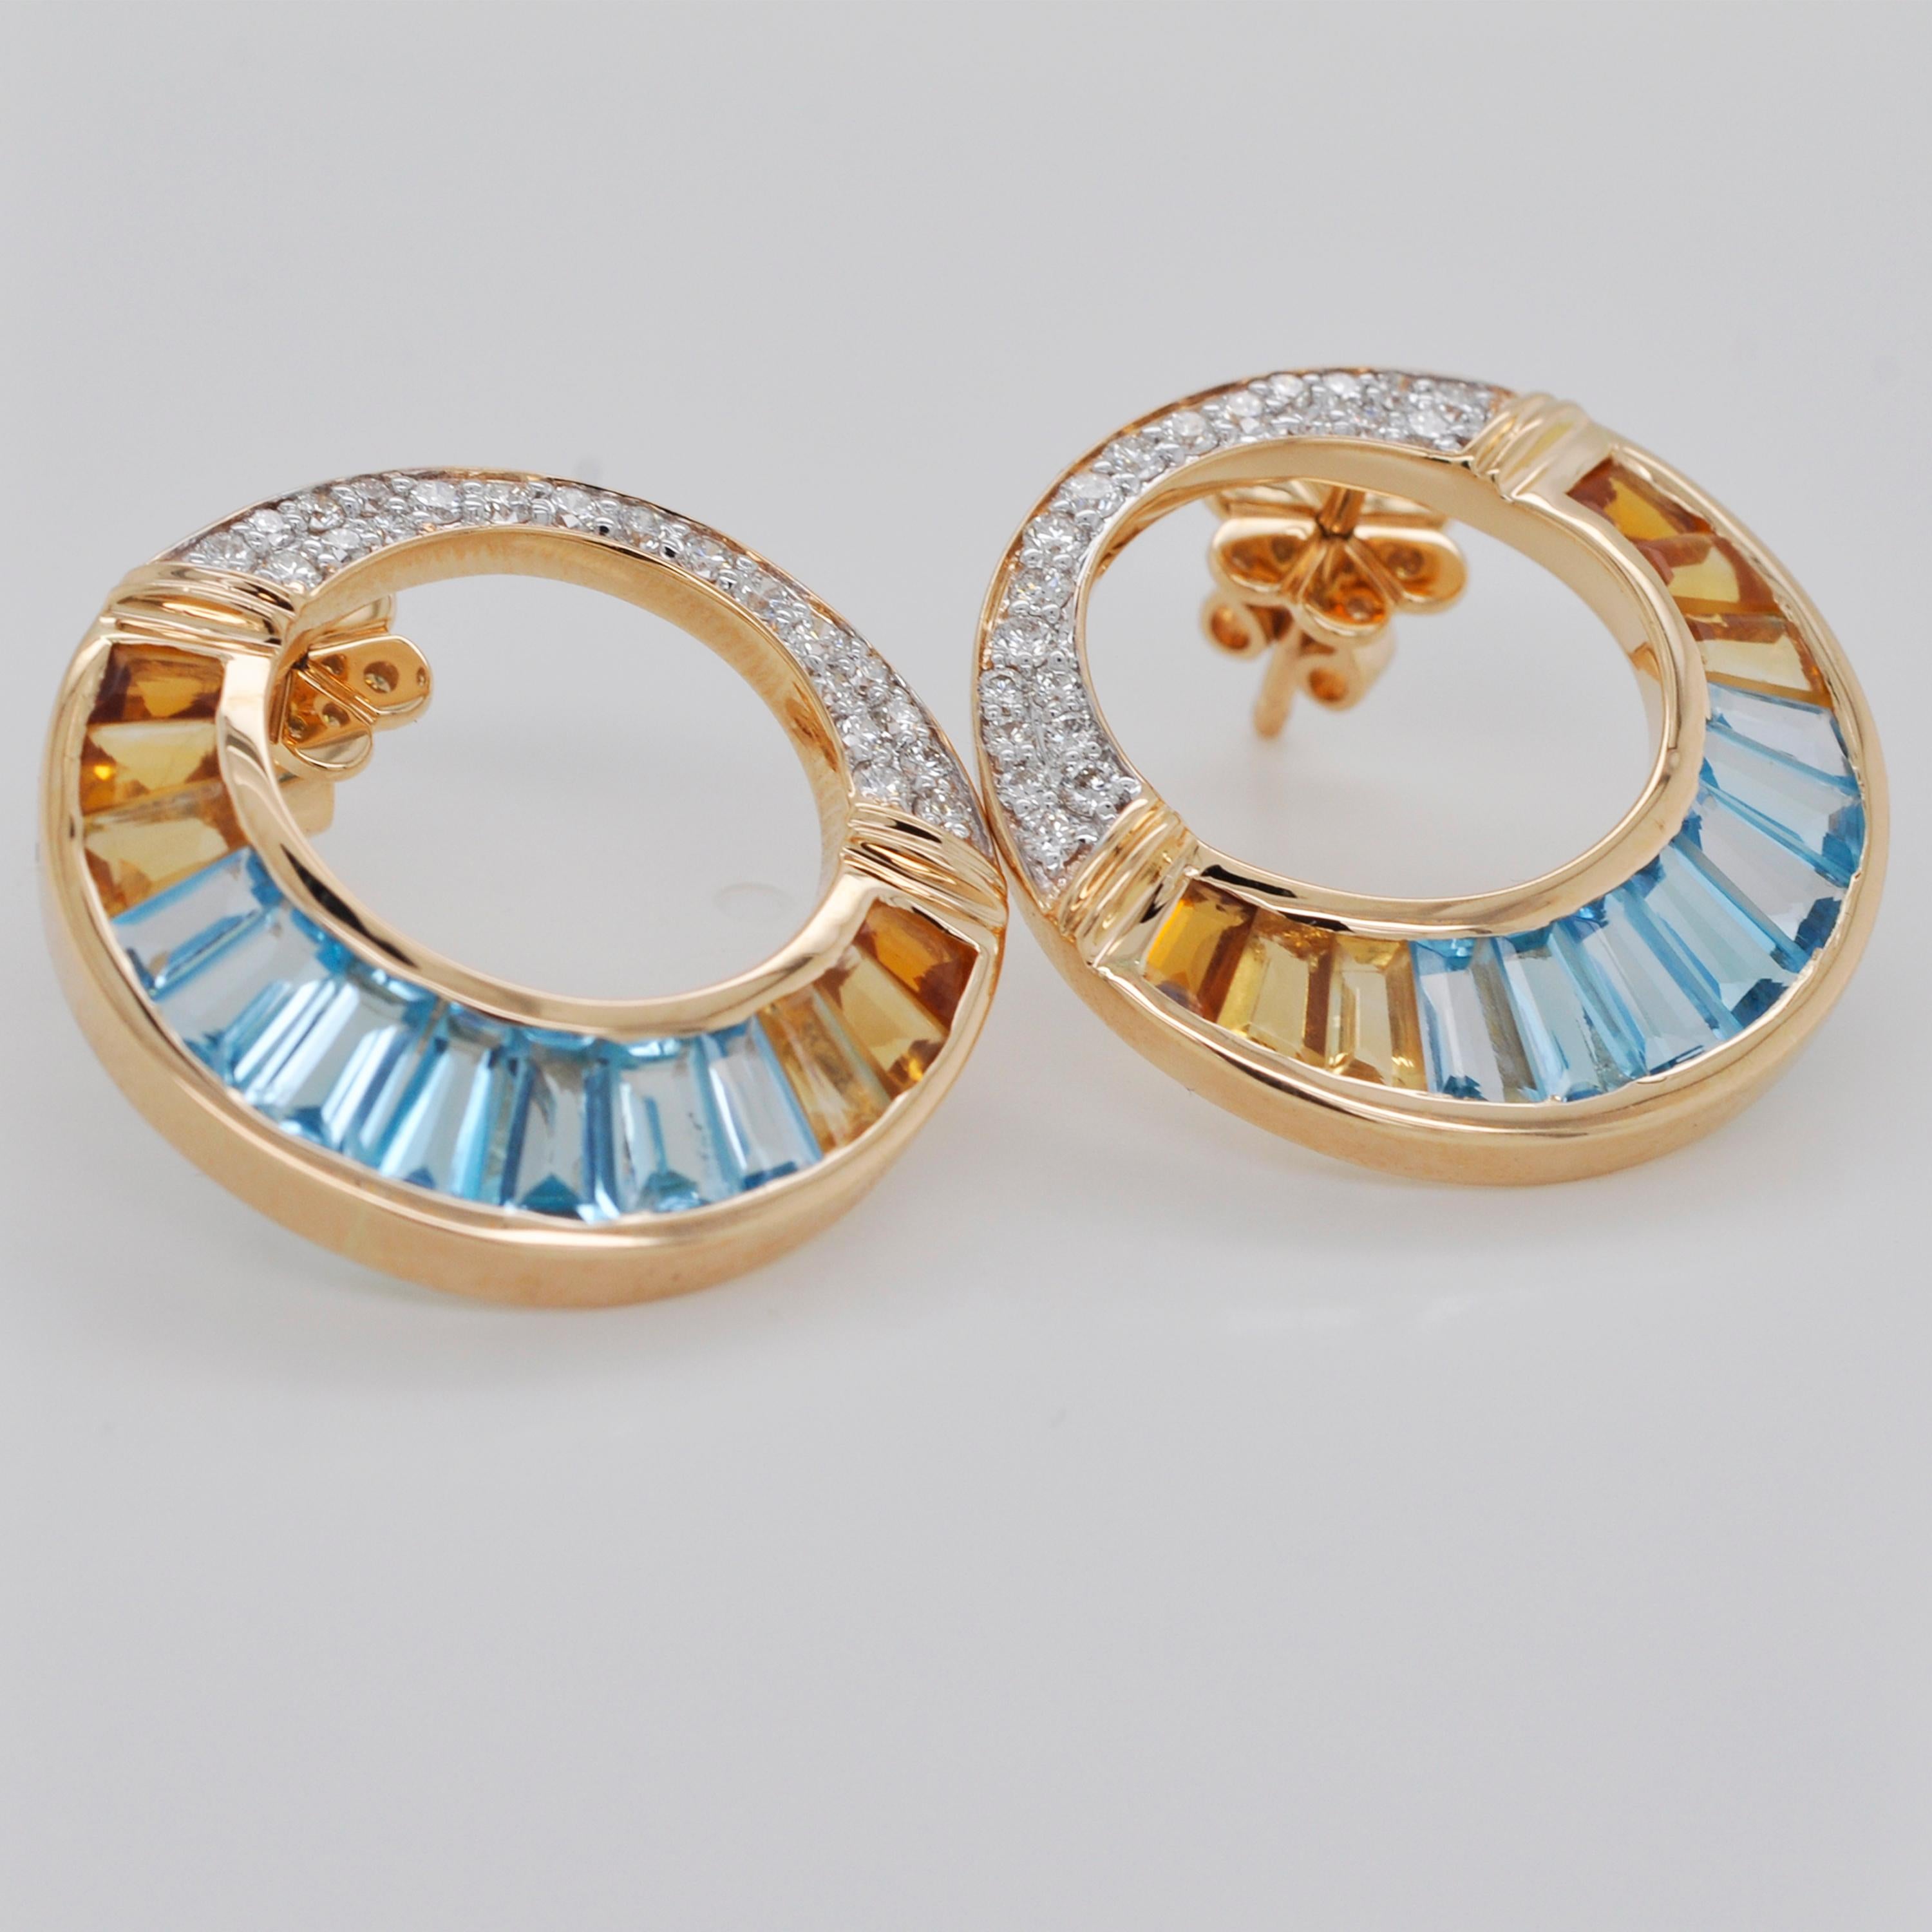 18 Karat Yellow Gold Blue Topaz Citrine Baguette Diamond Circular Stud Earrings In New Condition For Sale In Jaipur, Rajasthan